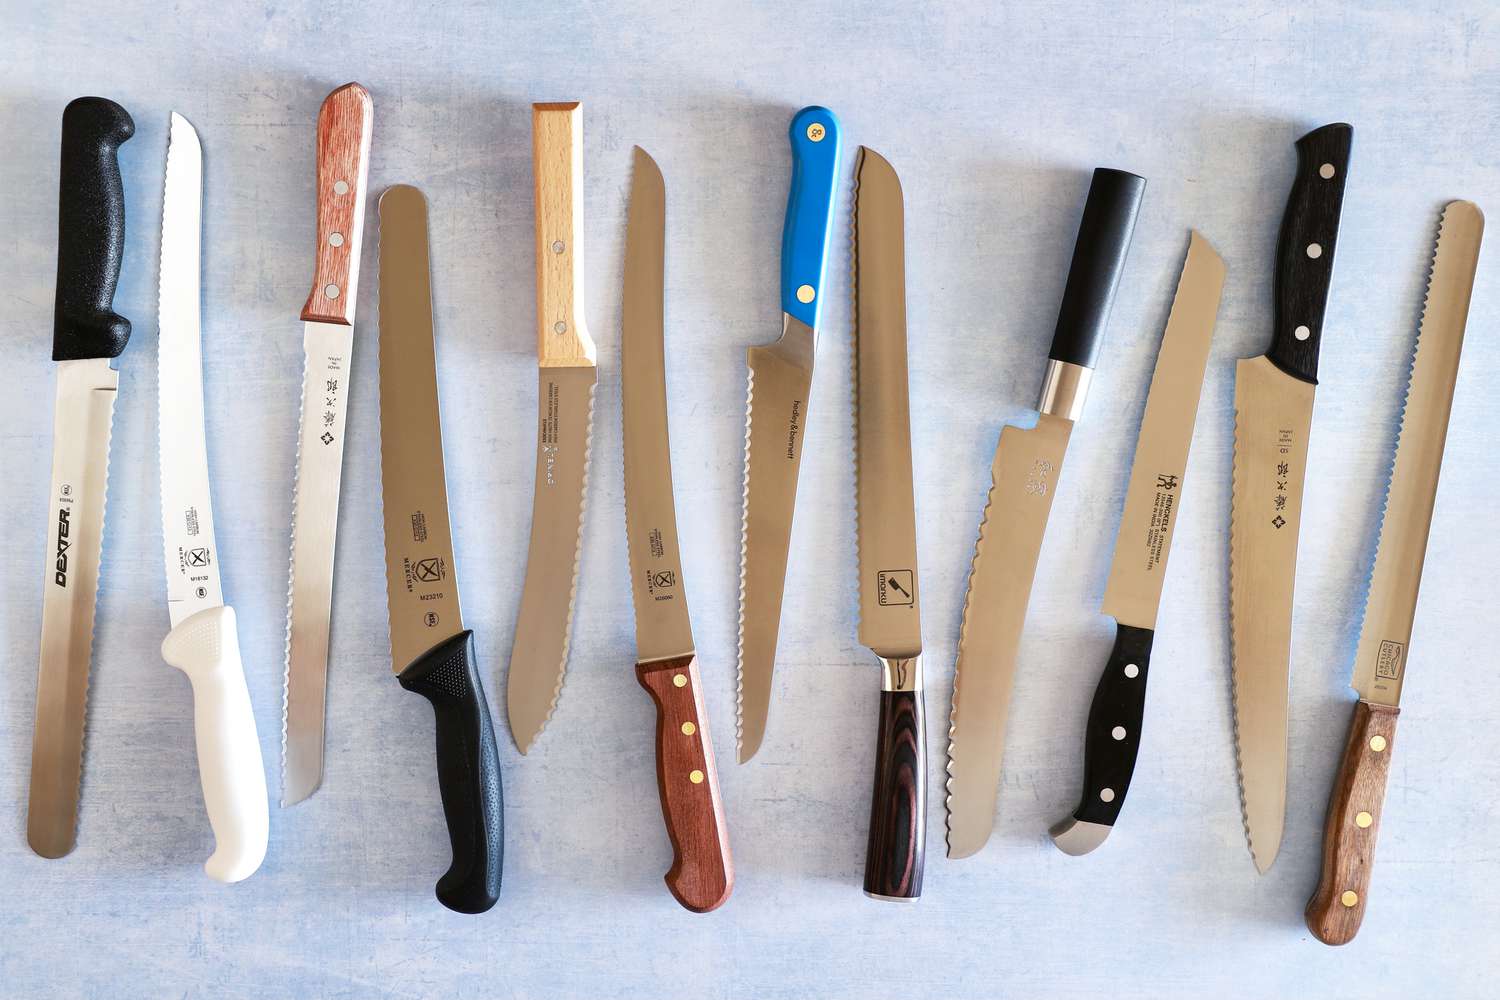 Top Kitchen Knife Set Review: Find the Perfect Set for Your Culinary Needs